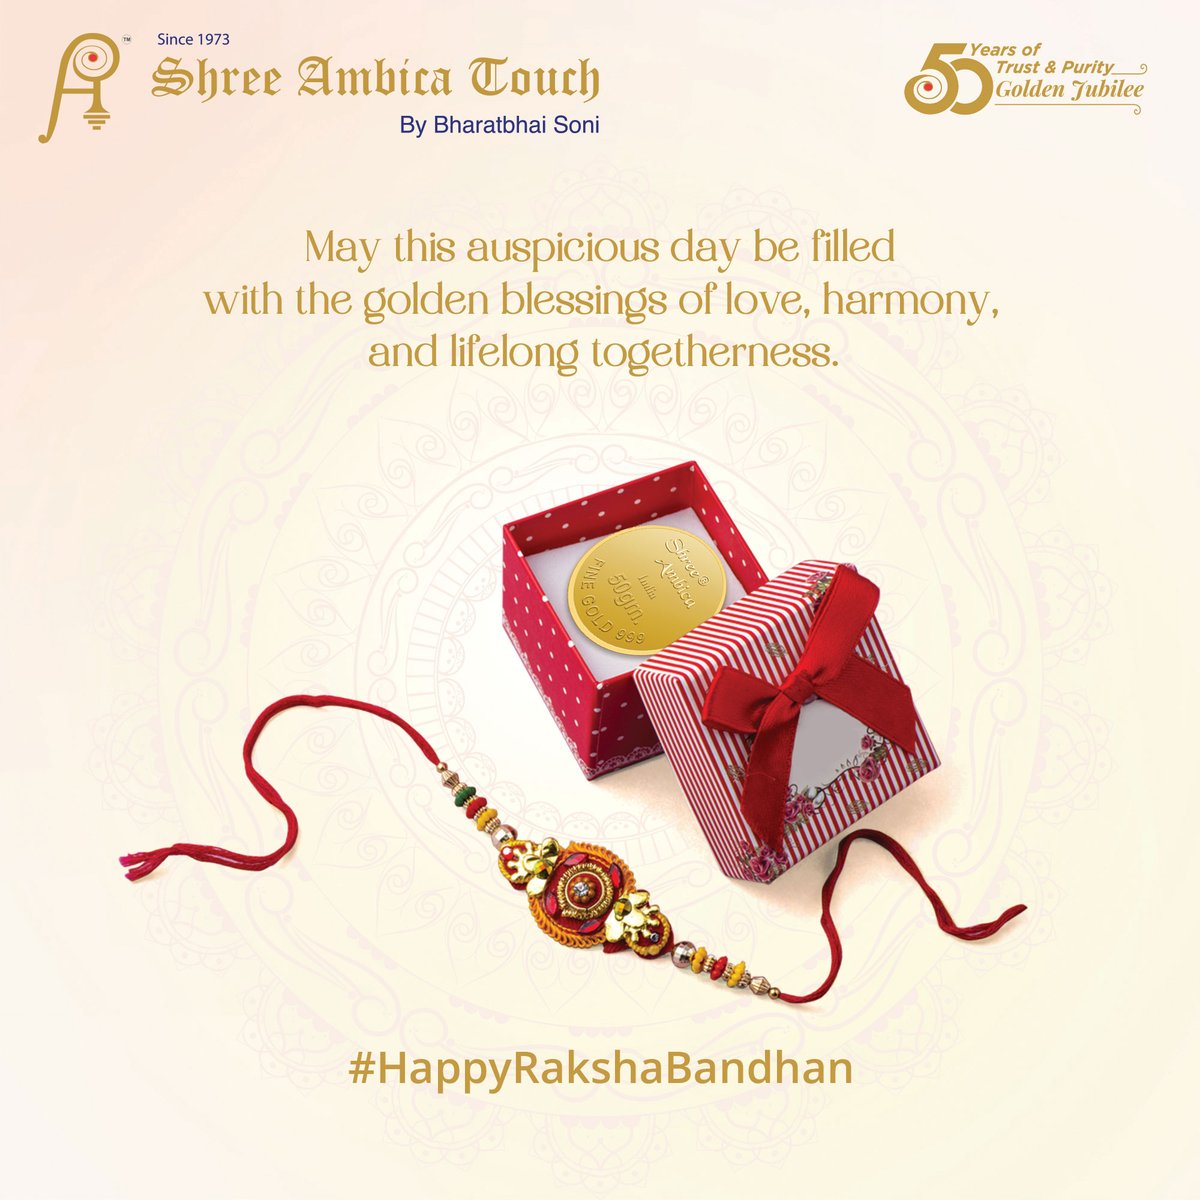 Embrace the bond that shines brighter than gold✨

Wishing you a heartfelt #RakshaBandhan filled with love, protection, and the precious glow of pure gold.

#Celebrate #gift #giftgold #goldcoins #refinery #india #cgroad #manekchowk #newvadaj #satellite